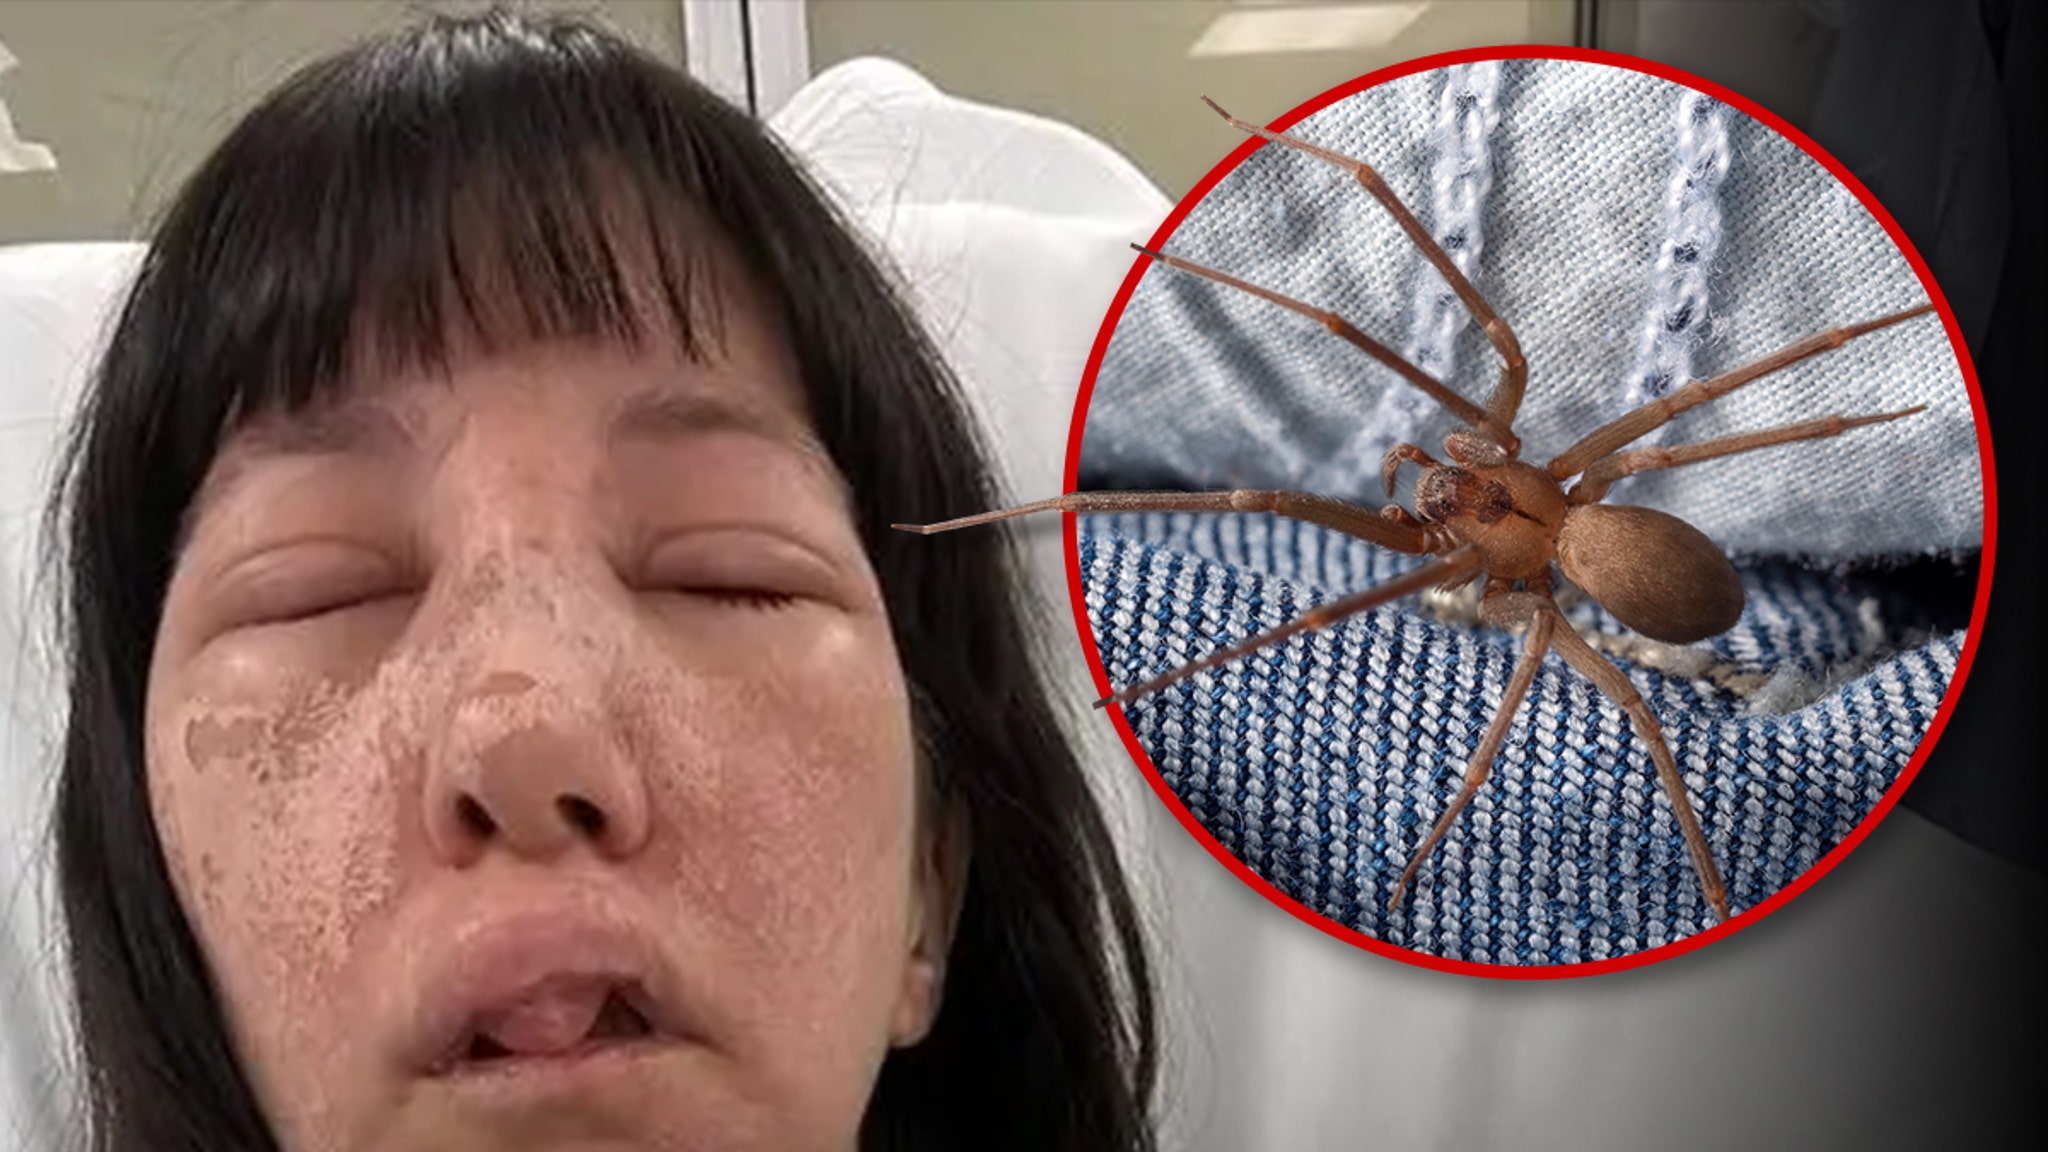 Georgia Woman Suffers Horrible Injuries After Attack from Deadly Spiders